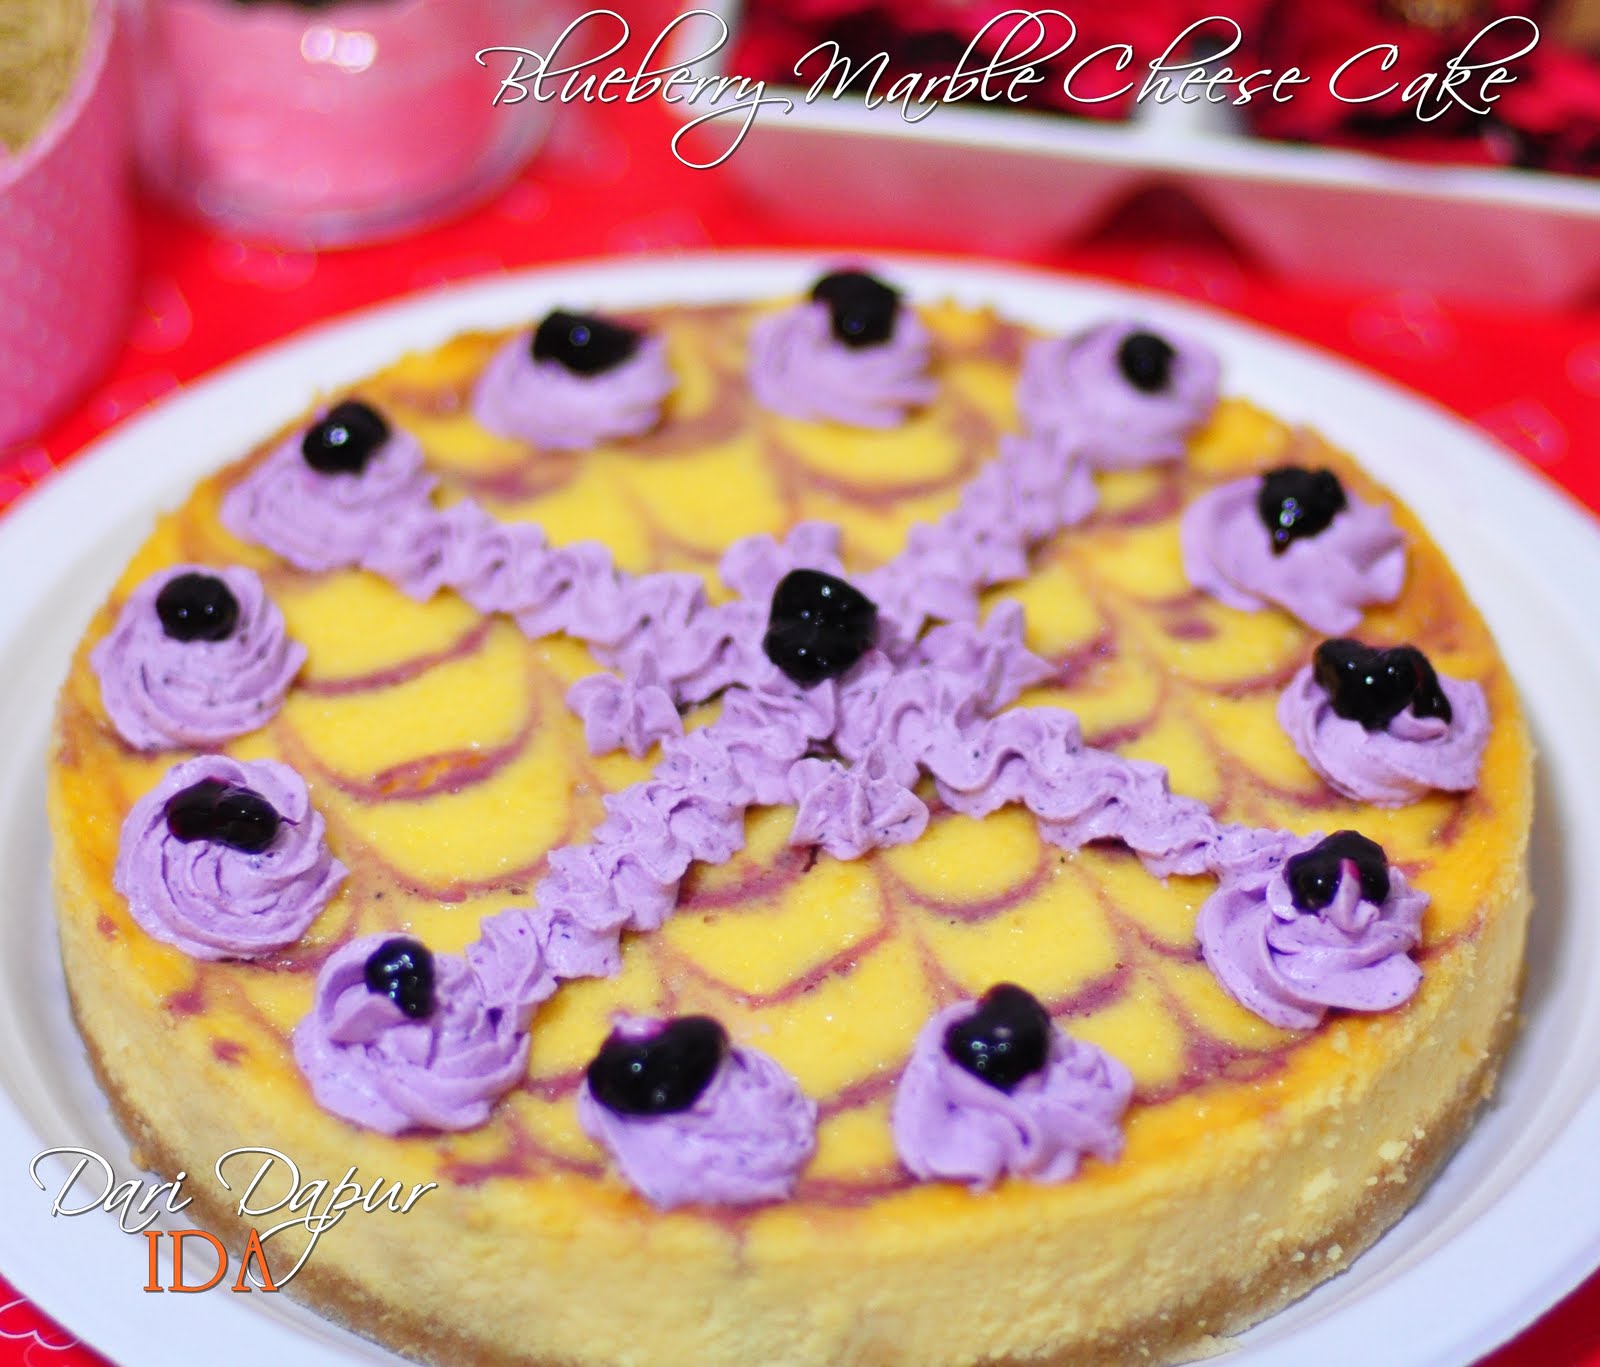 Blueberry Marble Cheese Cake